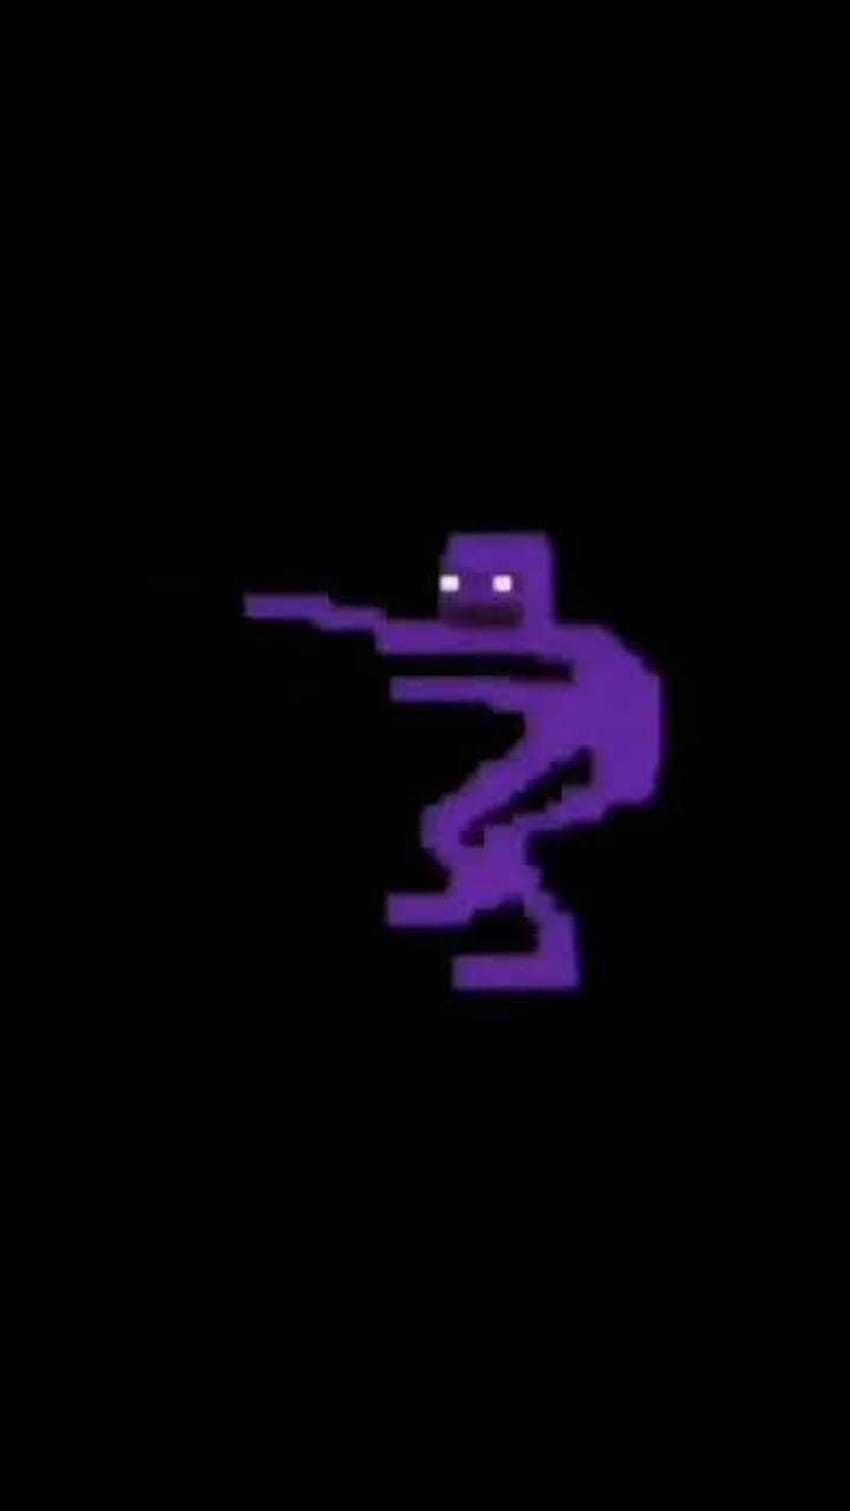 purple guy wallpaper  Cerca con Google  Purple guy Background images  Scary